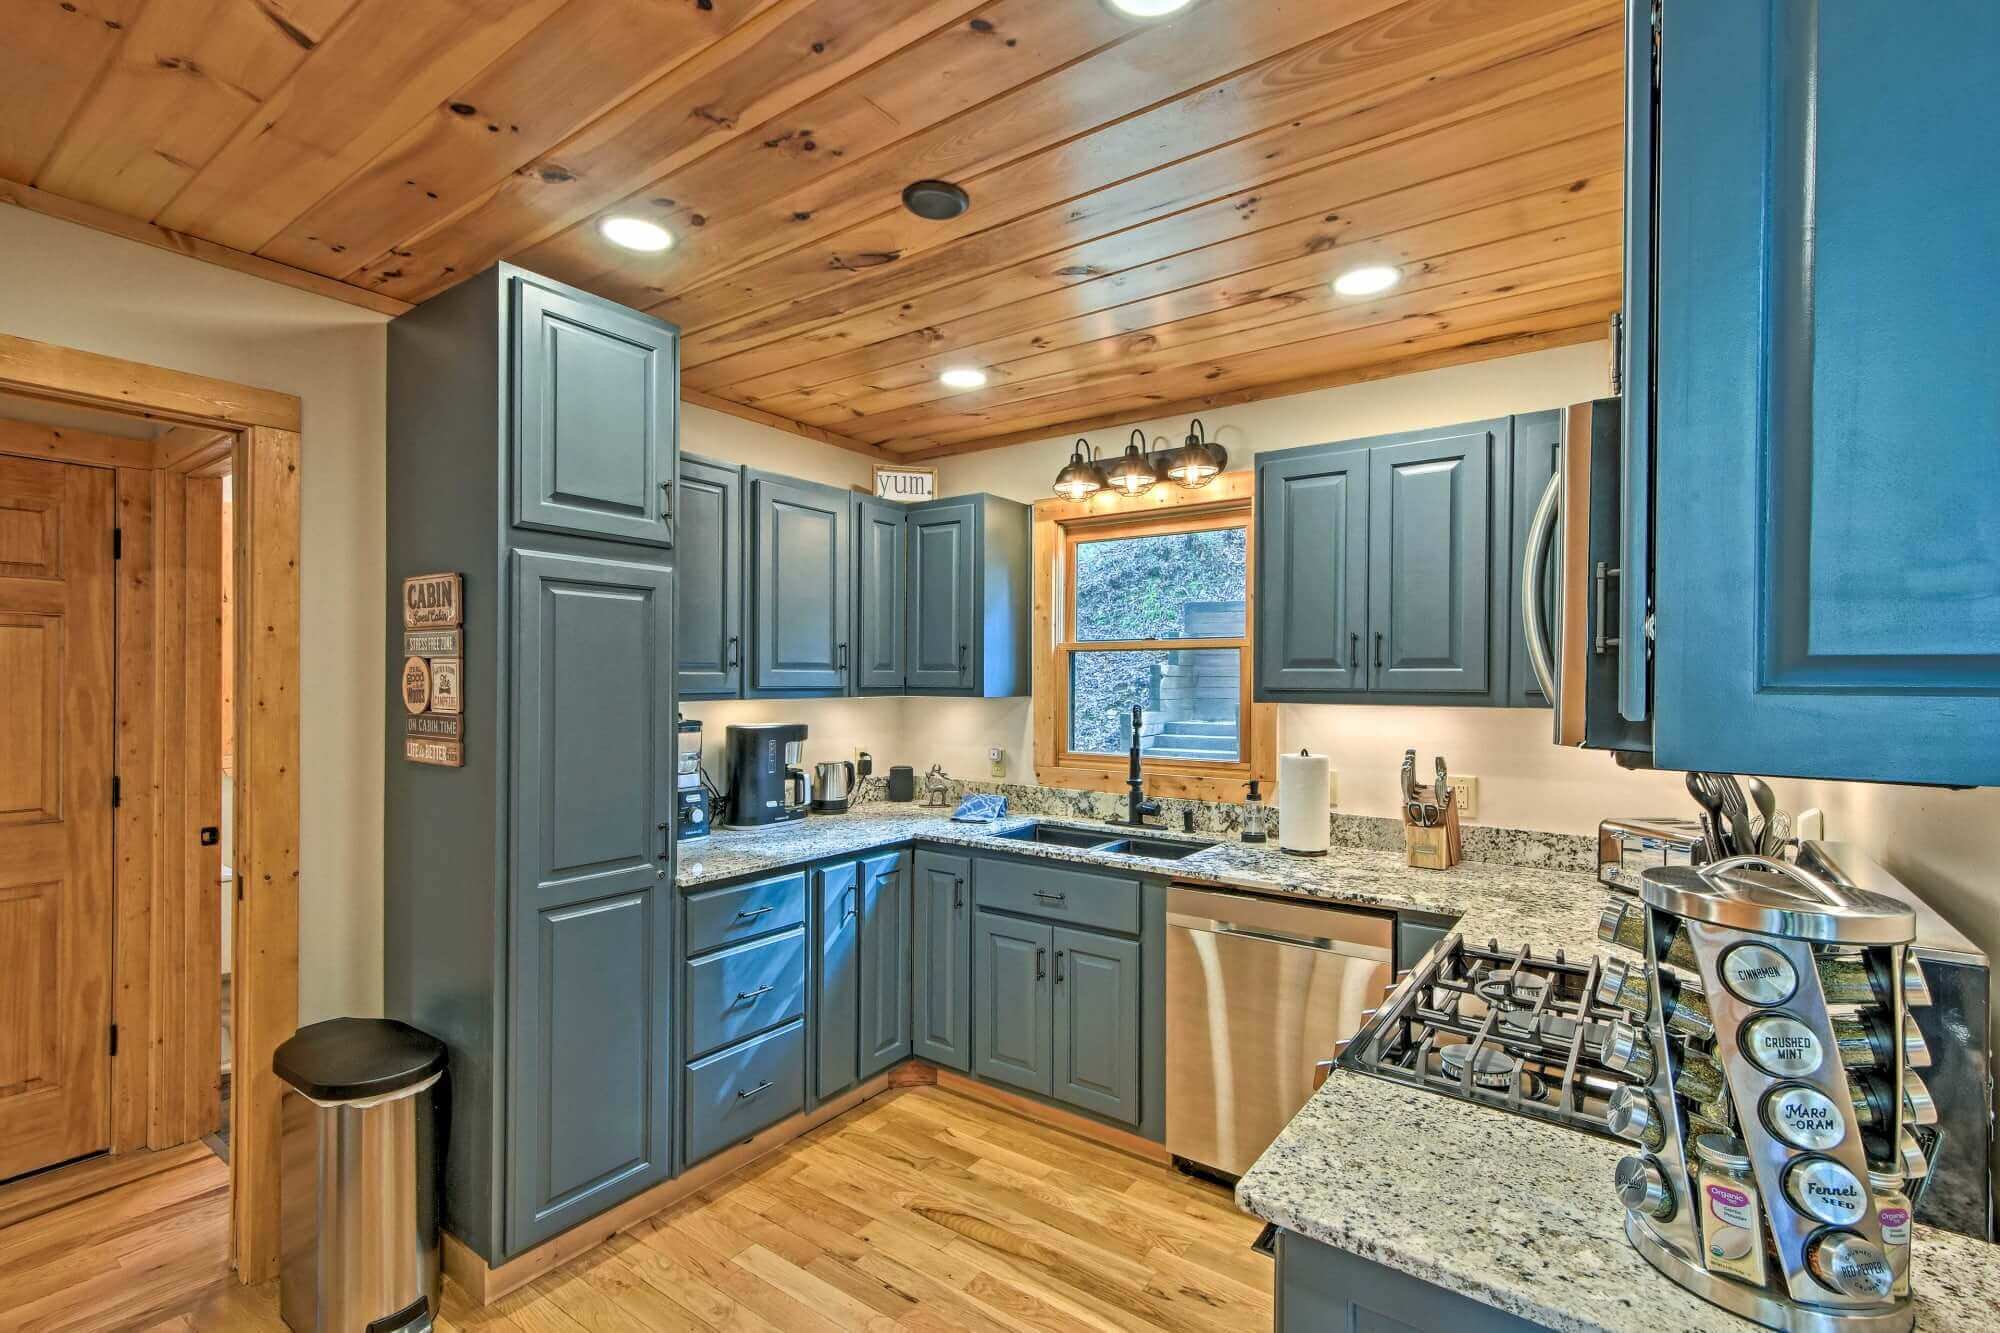 A modern kitchen for your enjoyment. All the special touches you need including coffee from kCups, French Press, or Traditional Brew. Grinder included.